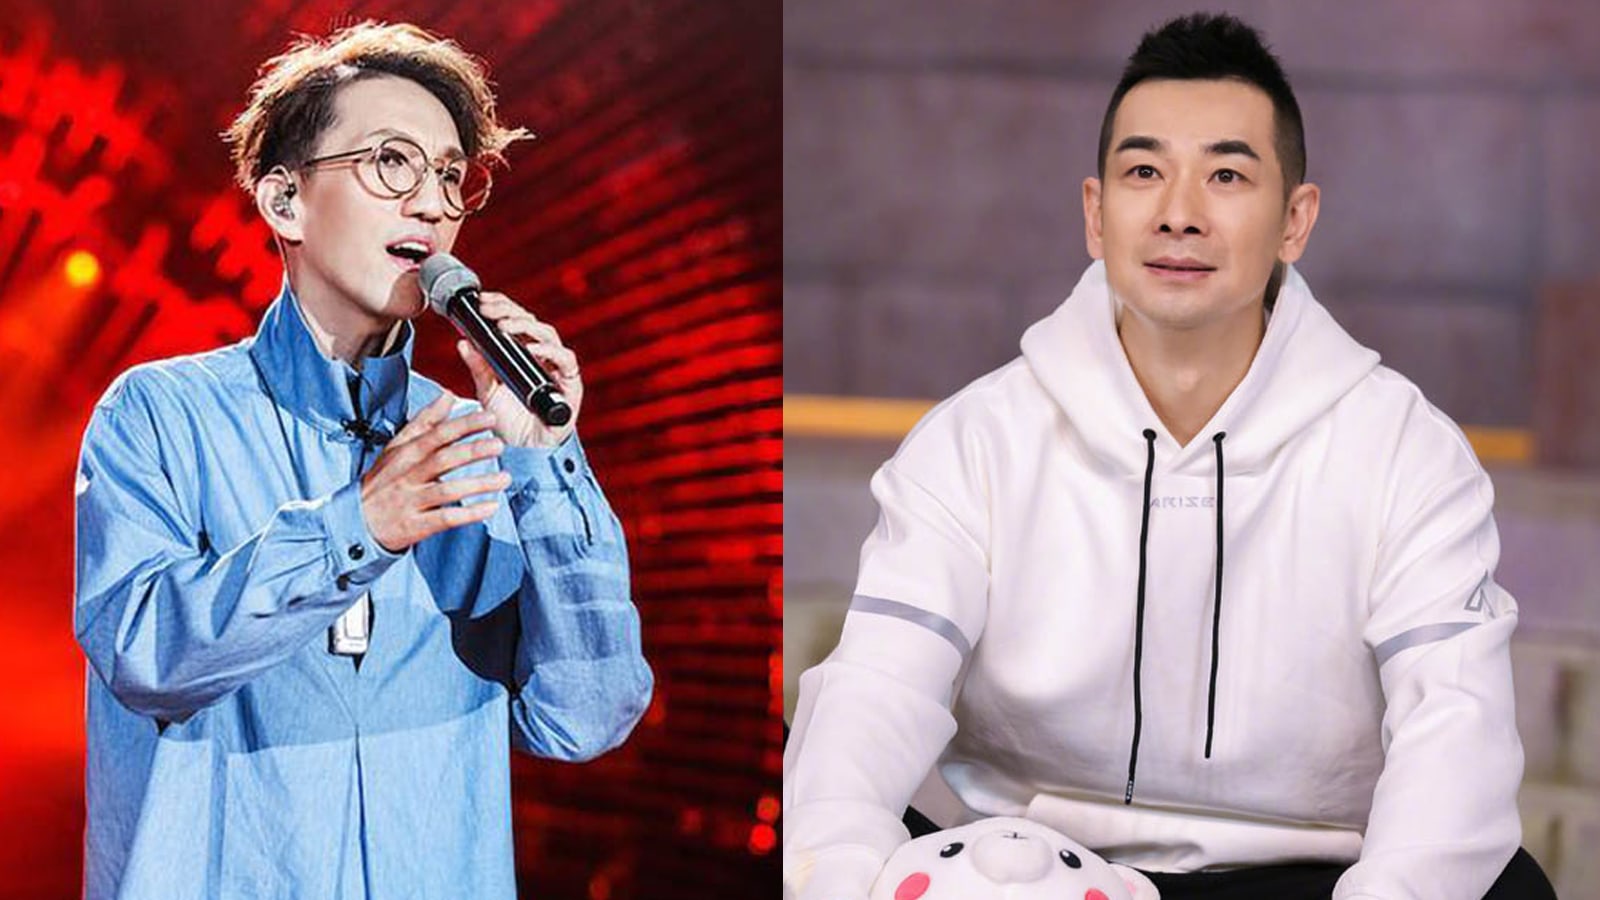 Vincent Zhao Says His Call Me By Fire Roommate Terry Lin Didn’t Want The Aircon On In Their Room; Terry Says It Was Vincent’s Idea